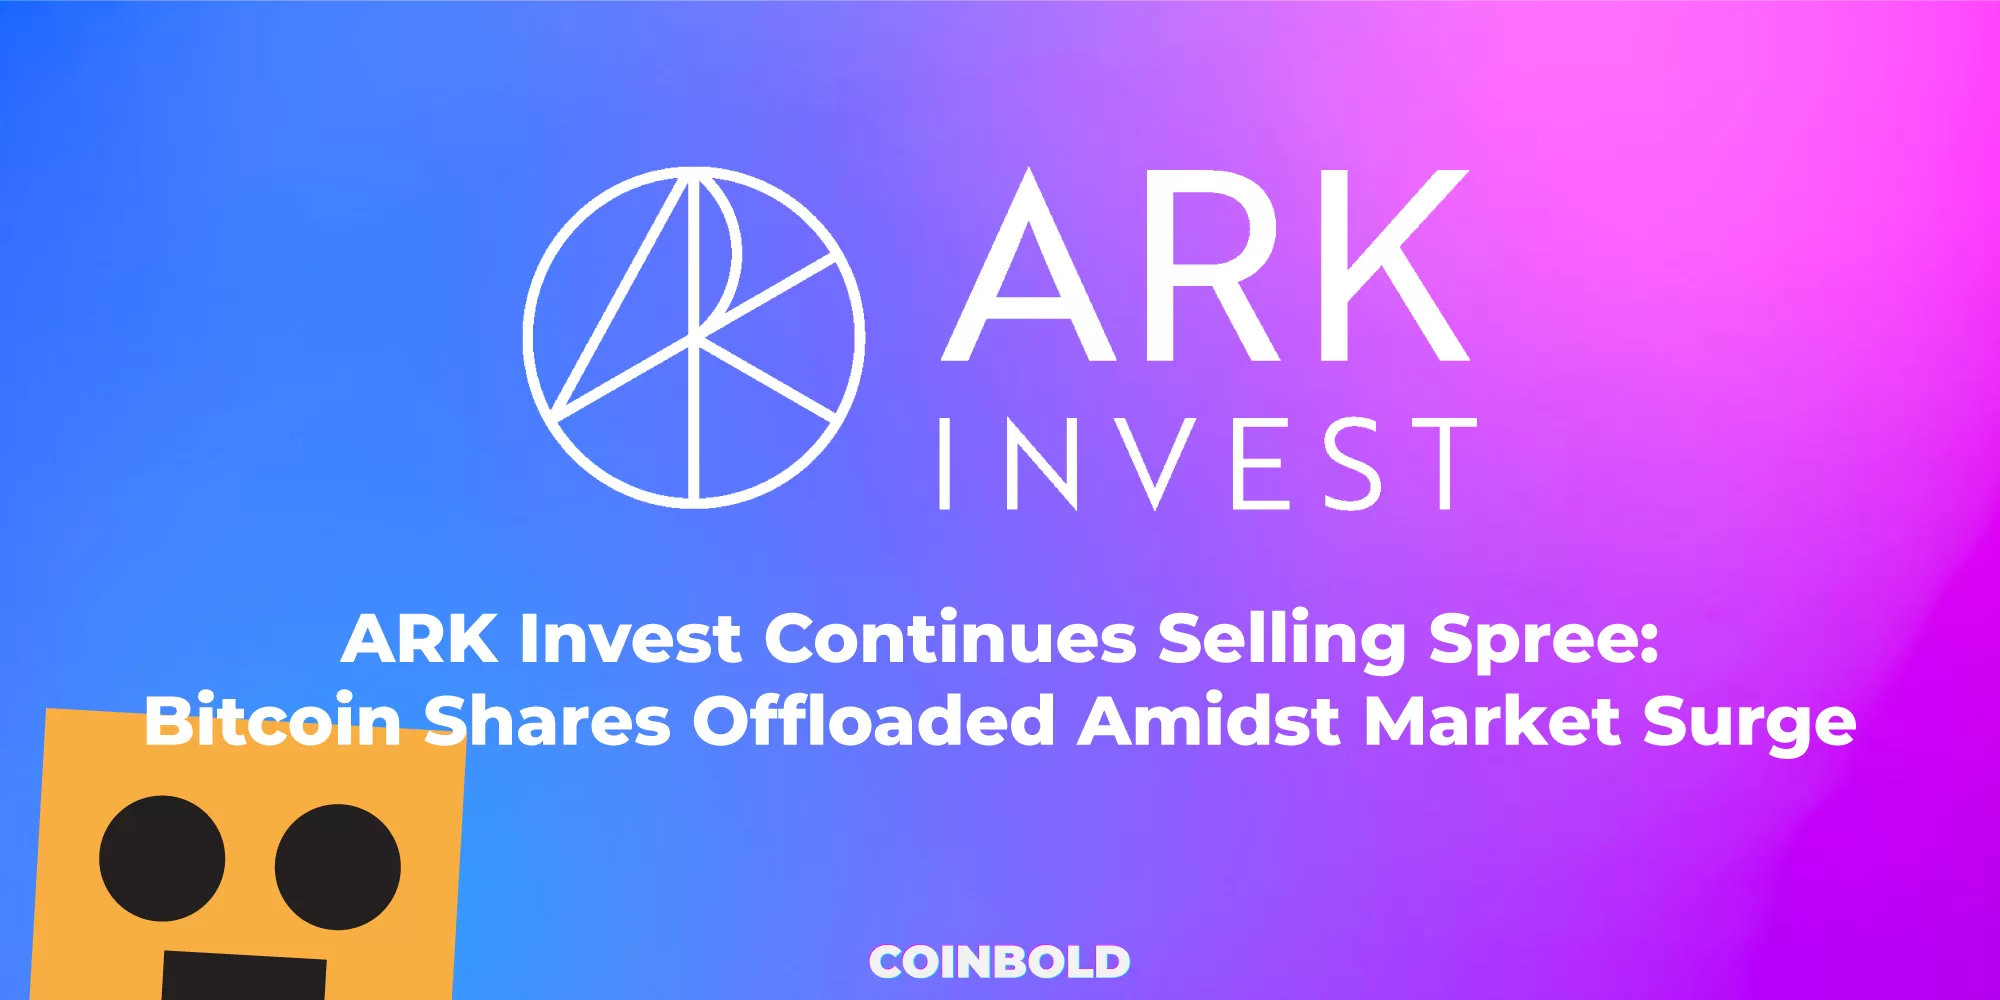 ARK Invest Continues Selling Spree Bitcoin Shares Offloaded Amidst Market Surge